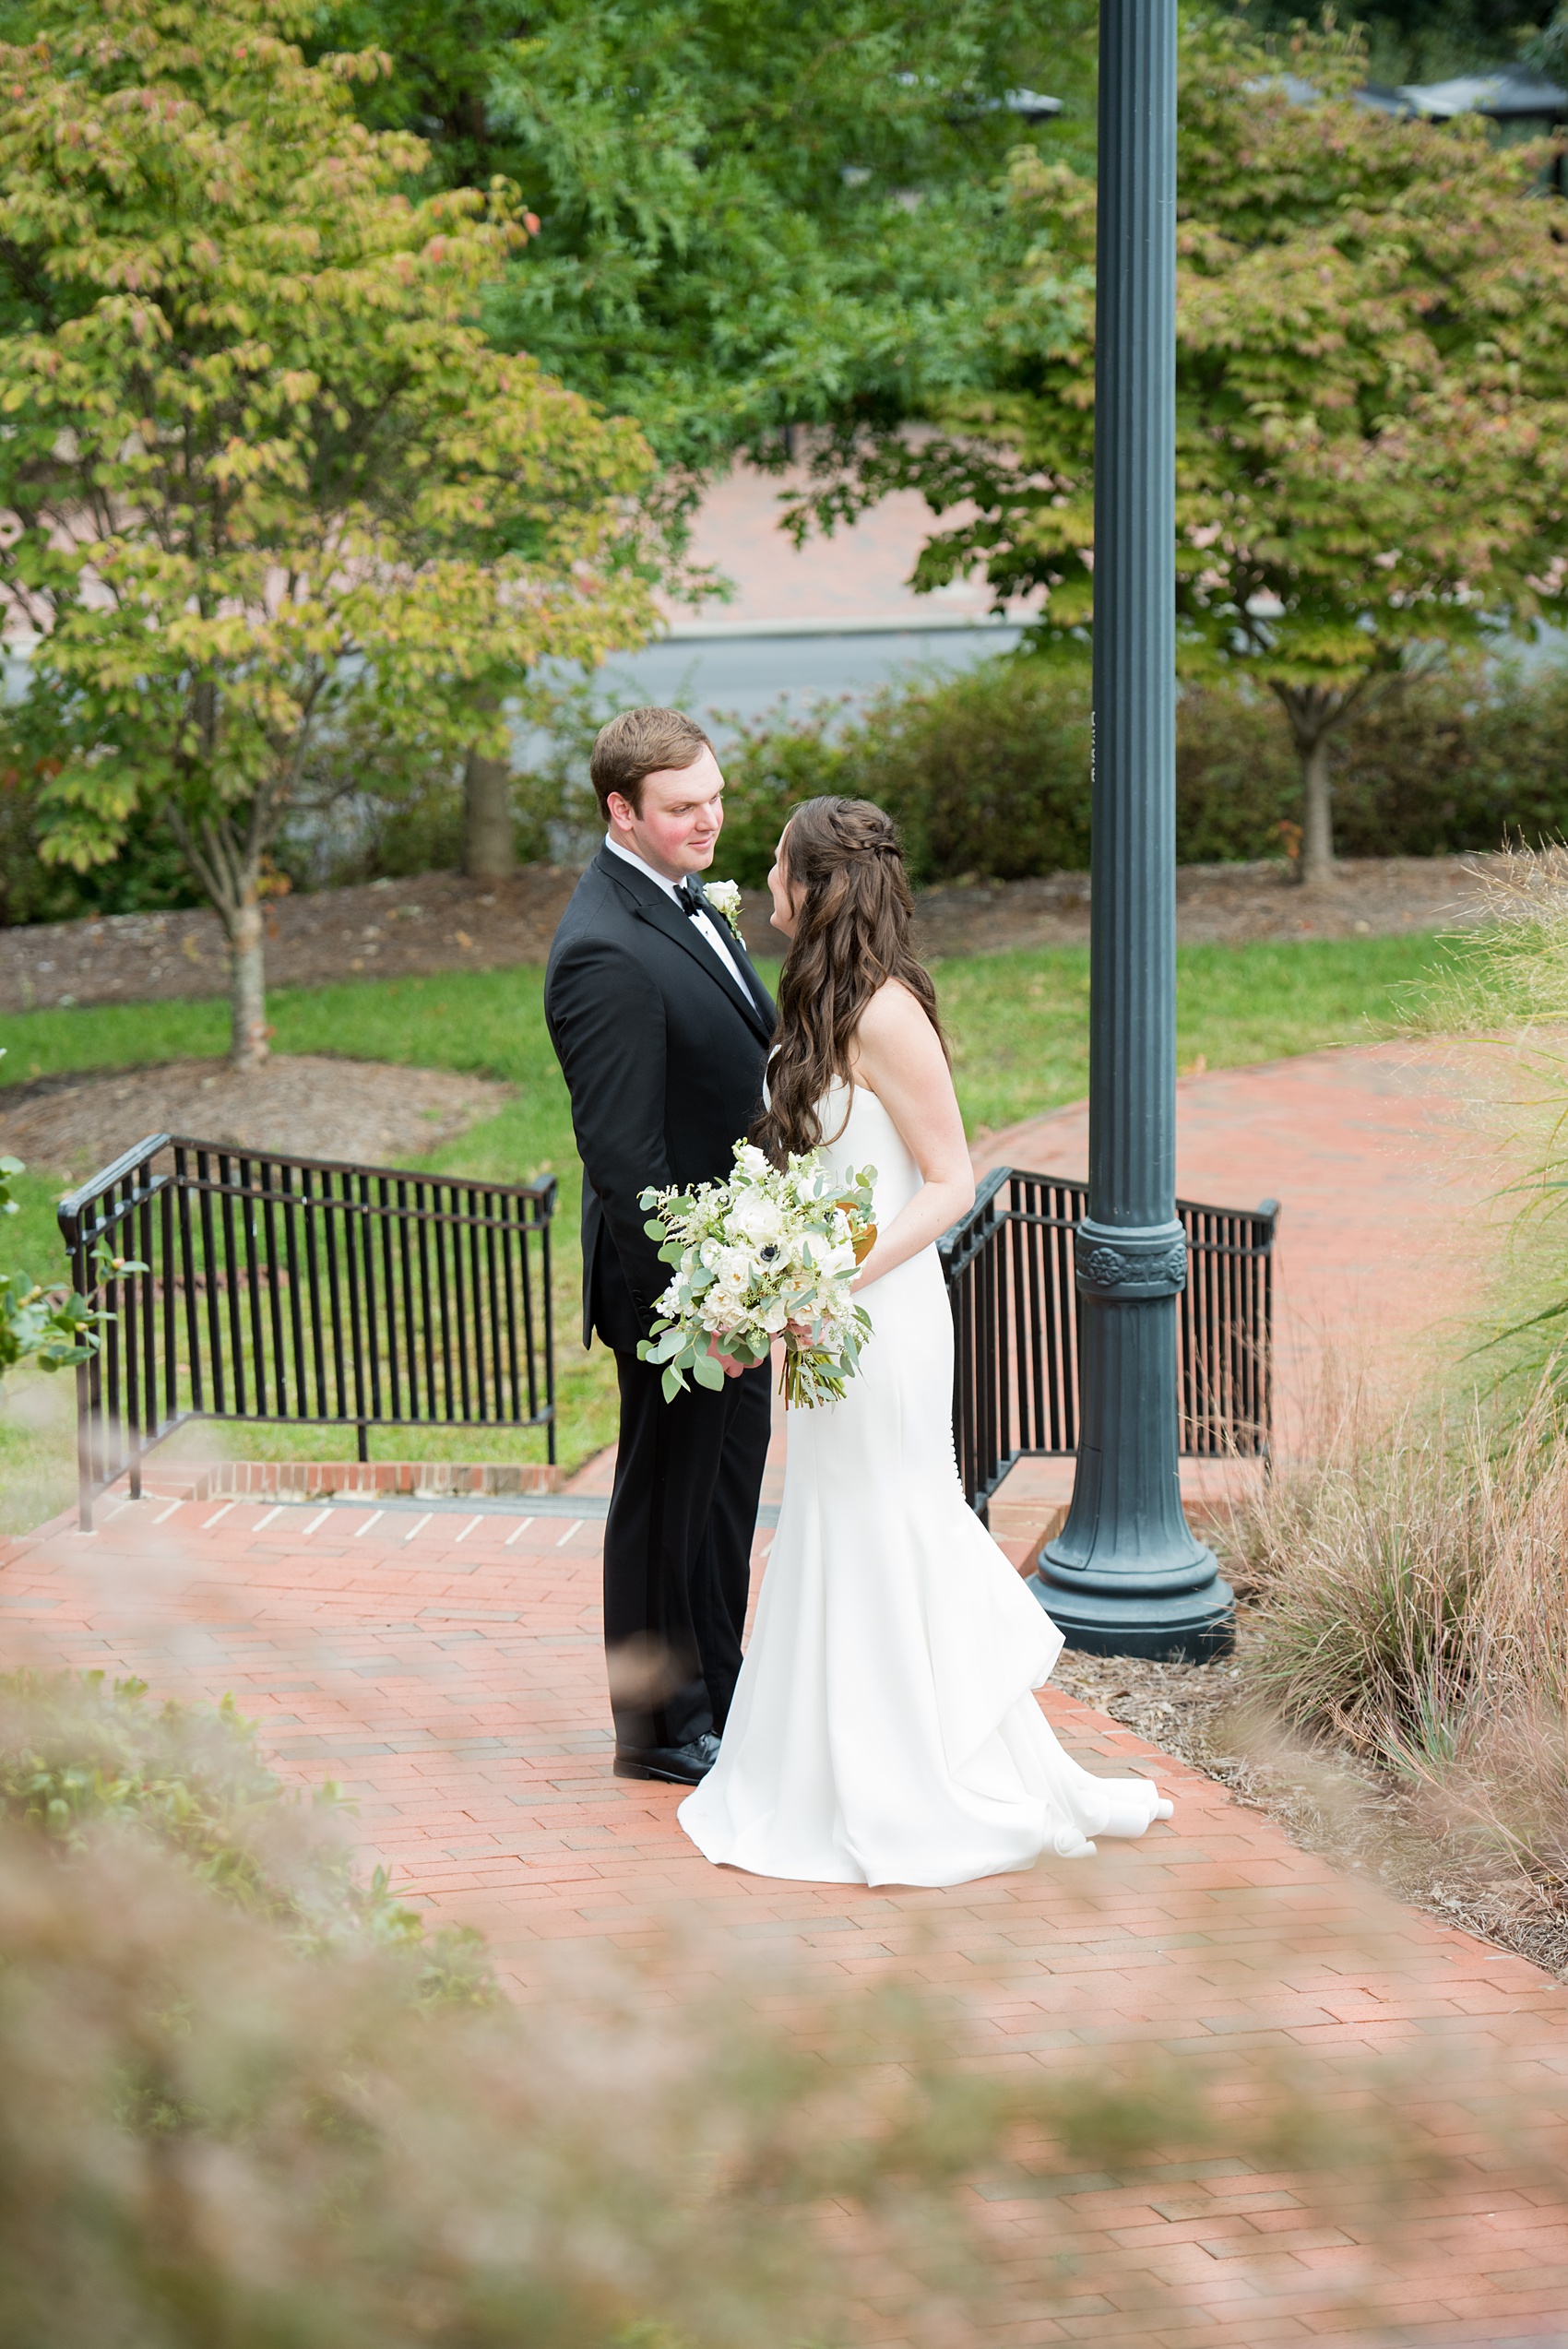 Photos of a fall wedding at The Carolina Inn, in Chapel Hill North Carolina, by Mikkel Paige Photography. This event venue doubles as a hotel for guests, who can enjoy a reception and ceremony indoors or outdoors. The bride wore a beautiful, simple white gown with a v-neck cut out and a cathedral length veil and groom a classic black tuxedo. Click through to see inspiration from the entire wedding! Planner: @asouthernsoiree #thecarolinainn #ChapelHillWeddings #MikkelPaige #bride #bridestyle